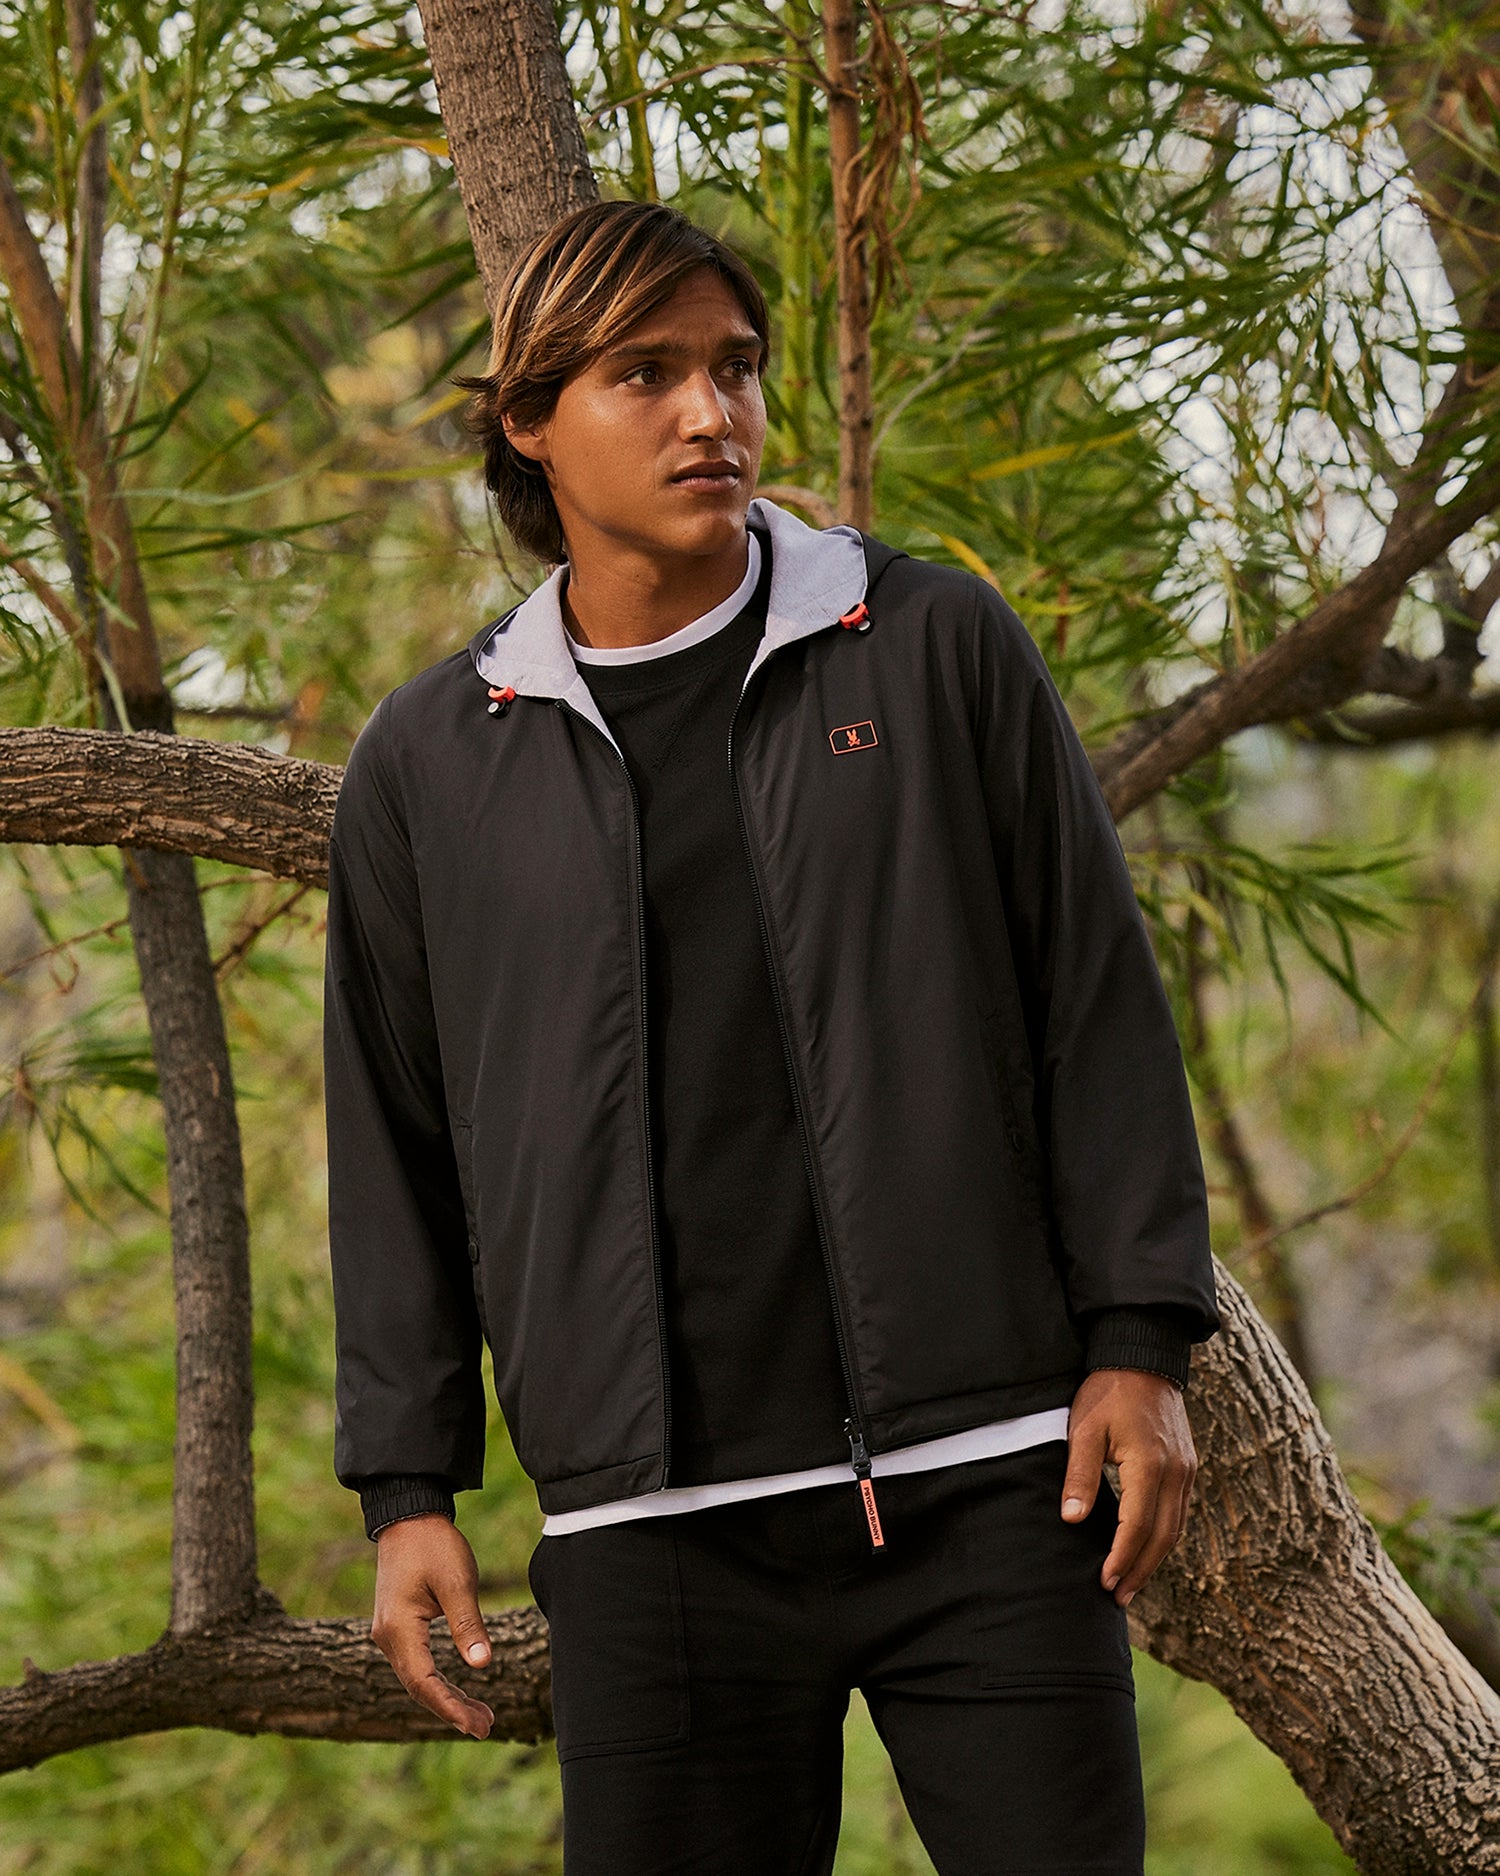 A person with long hair stands outdoors near tree branches, wearing a black water-repellent Psycho Bunny MENS HALFMOON REVERSIBLE JACKET - B6H169B200 over a white and black shirt. The background shows green foliage, highlighting a natural setting. The person is posing with one arm resting on a tree branch.